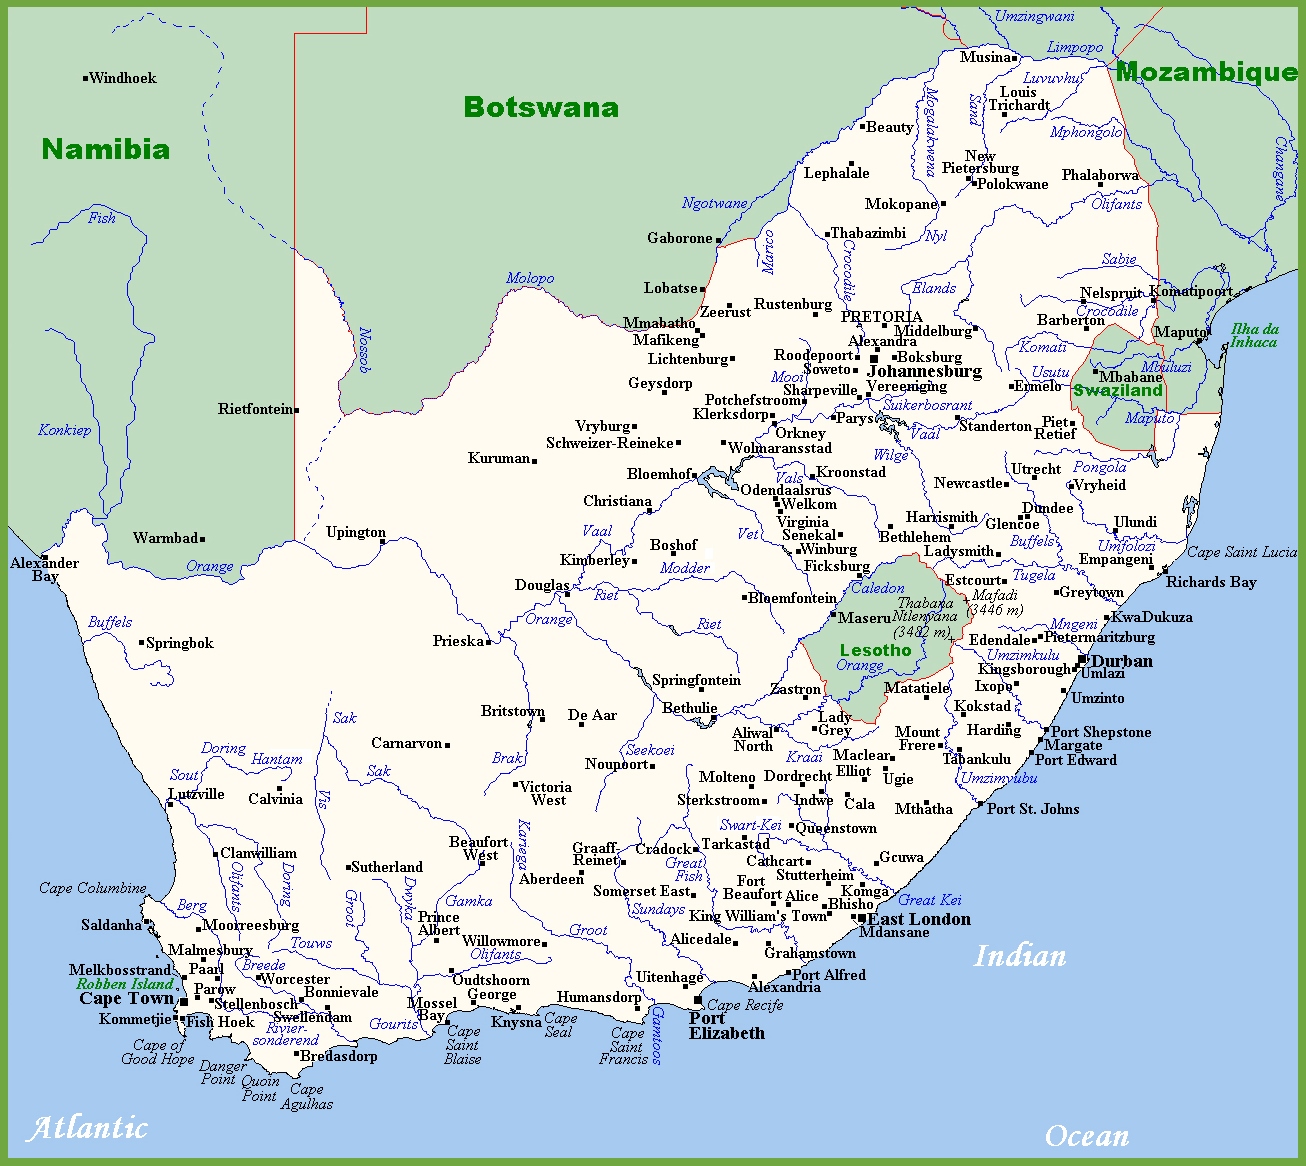 South Africa Capital Cities Map